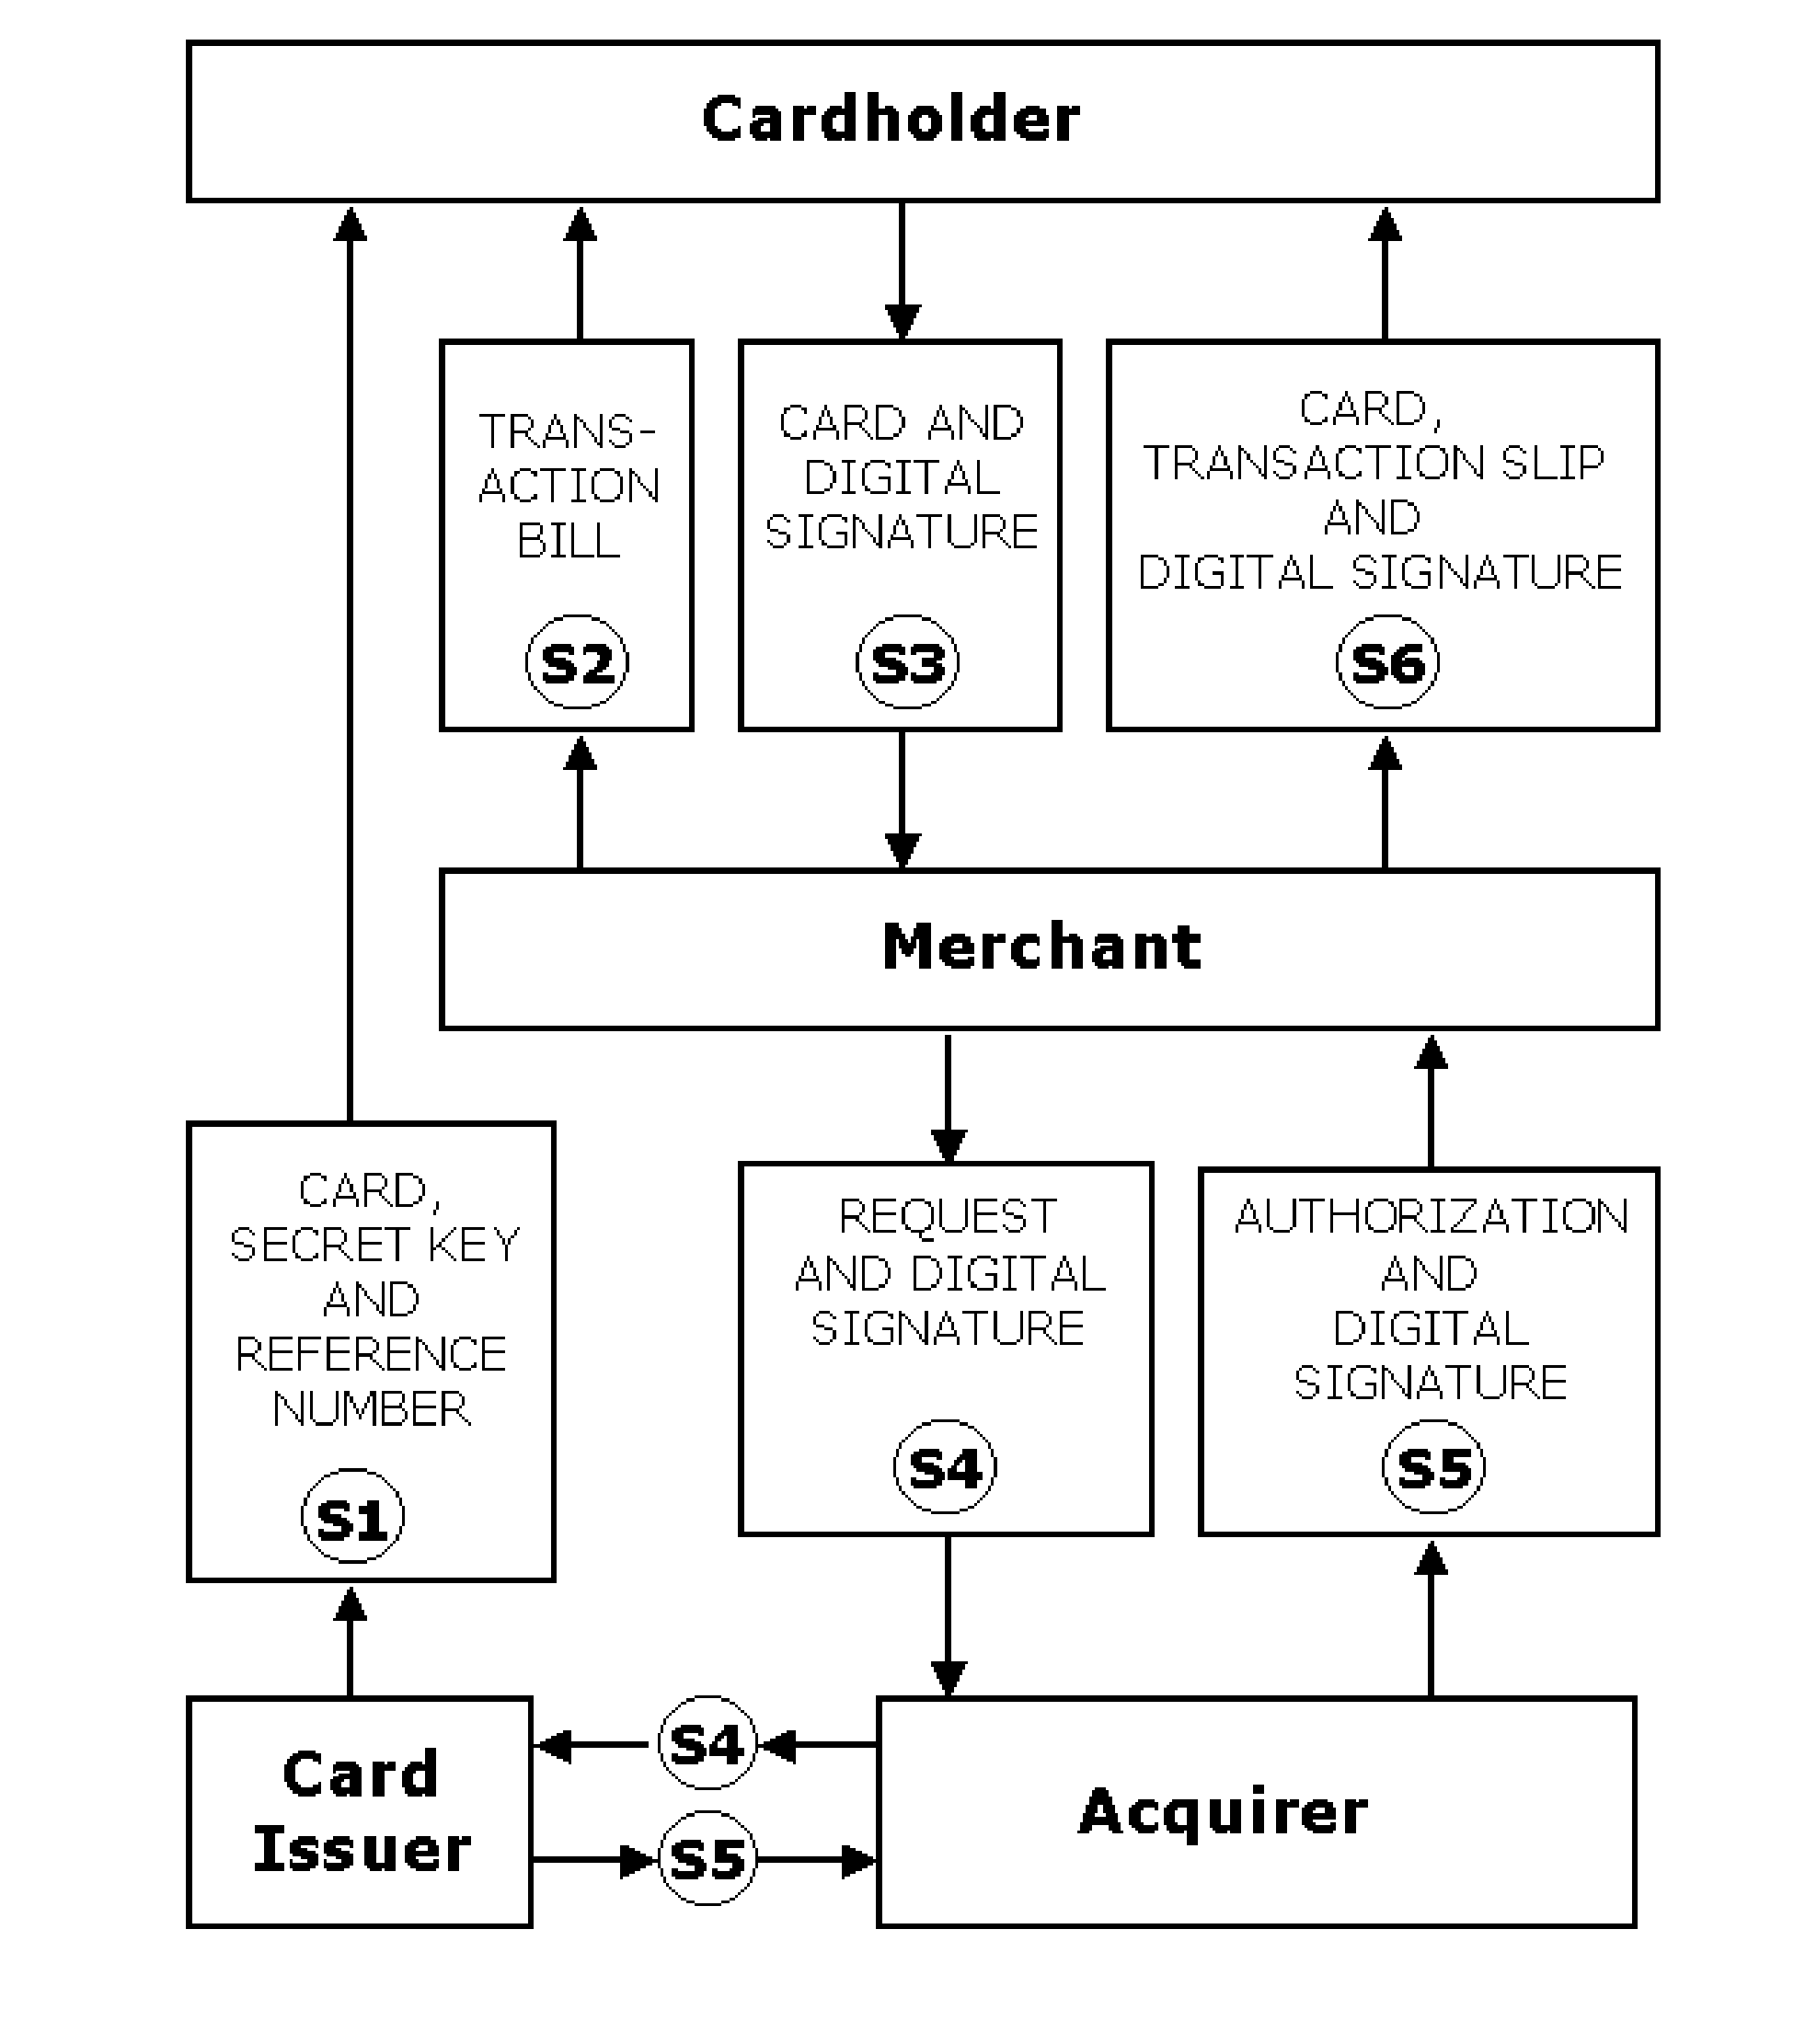 Method and System for Approving Card Transactions